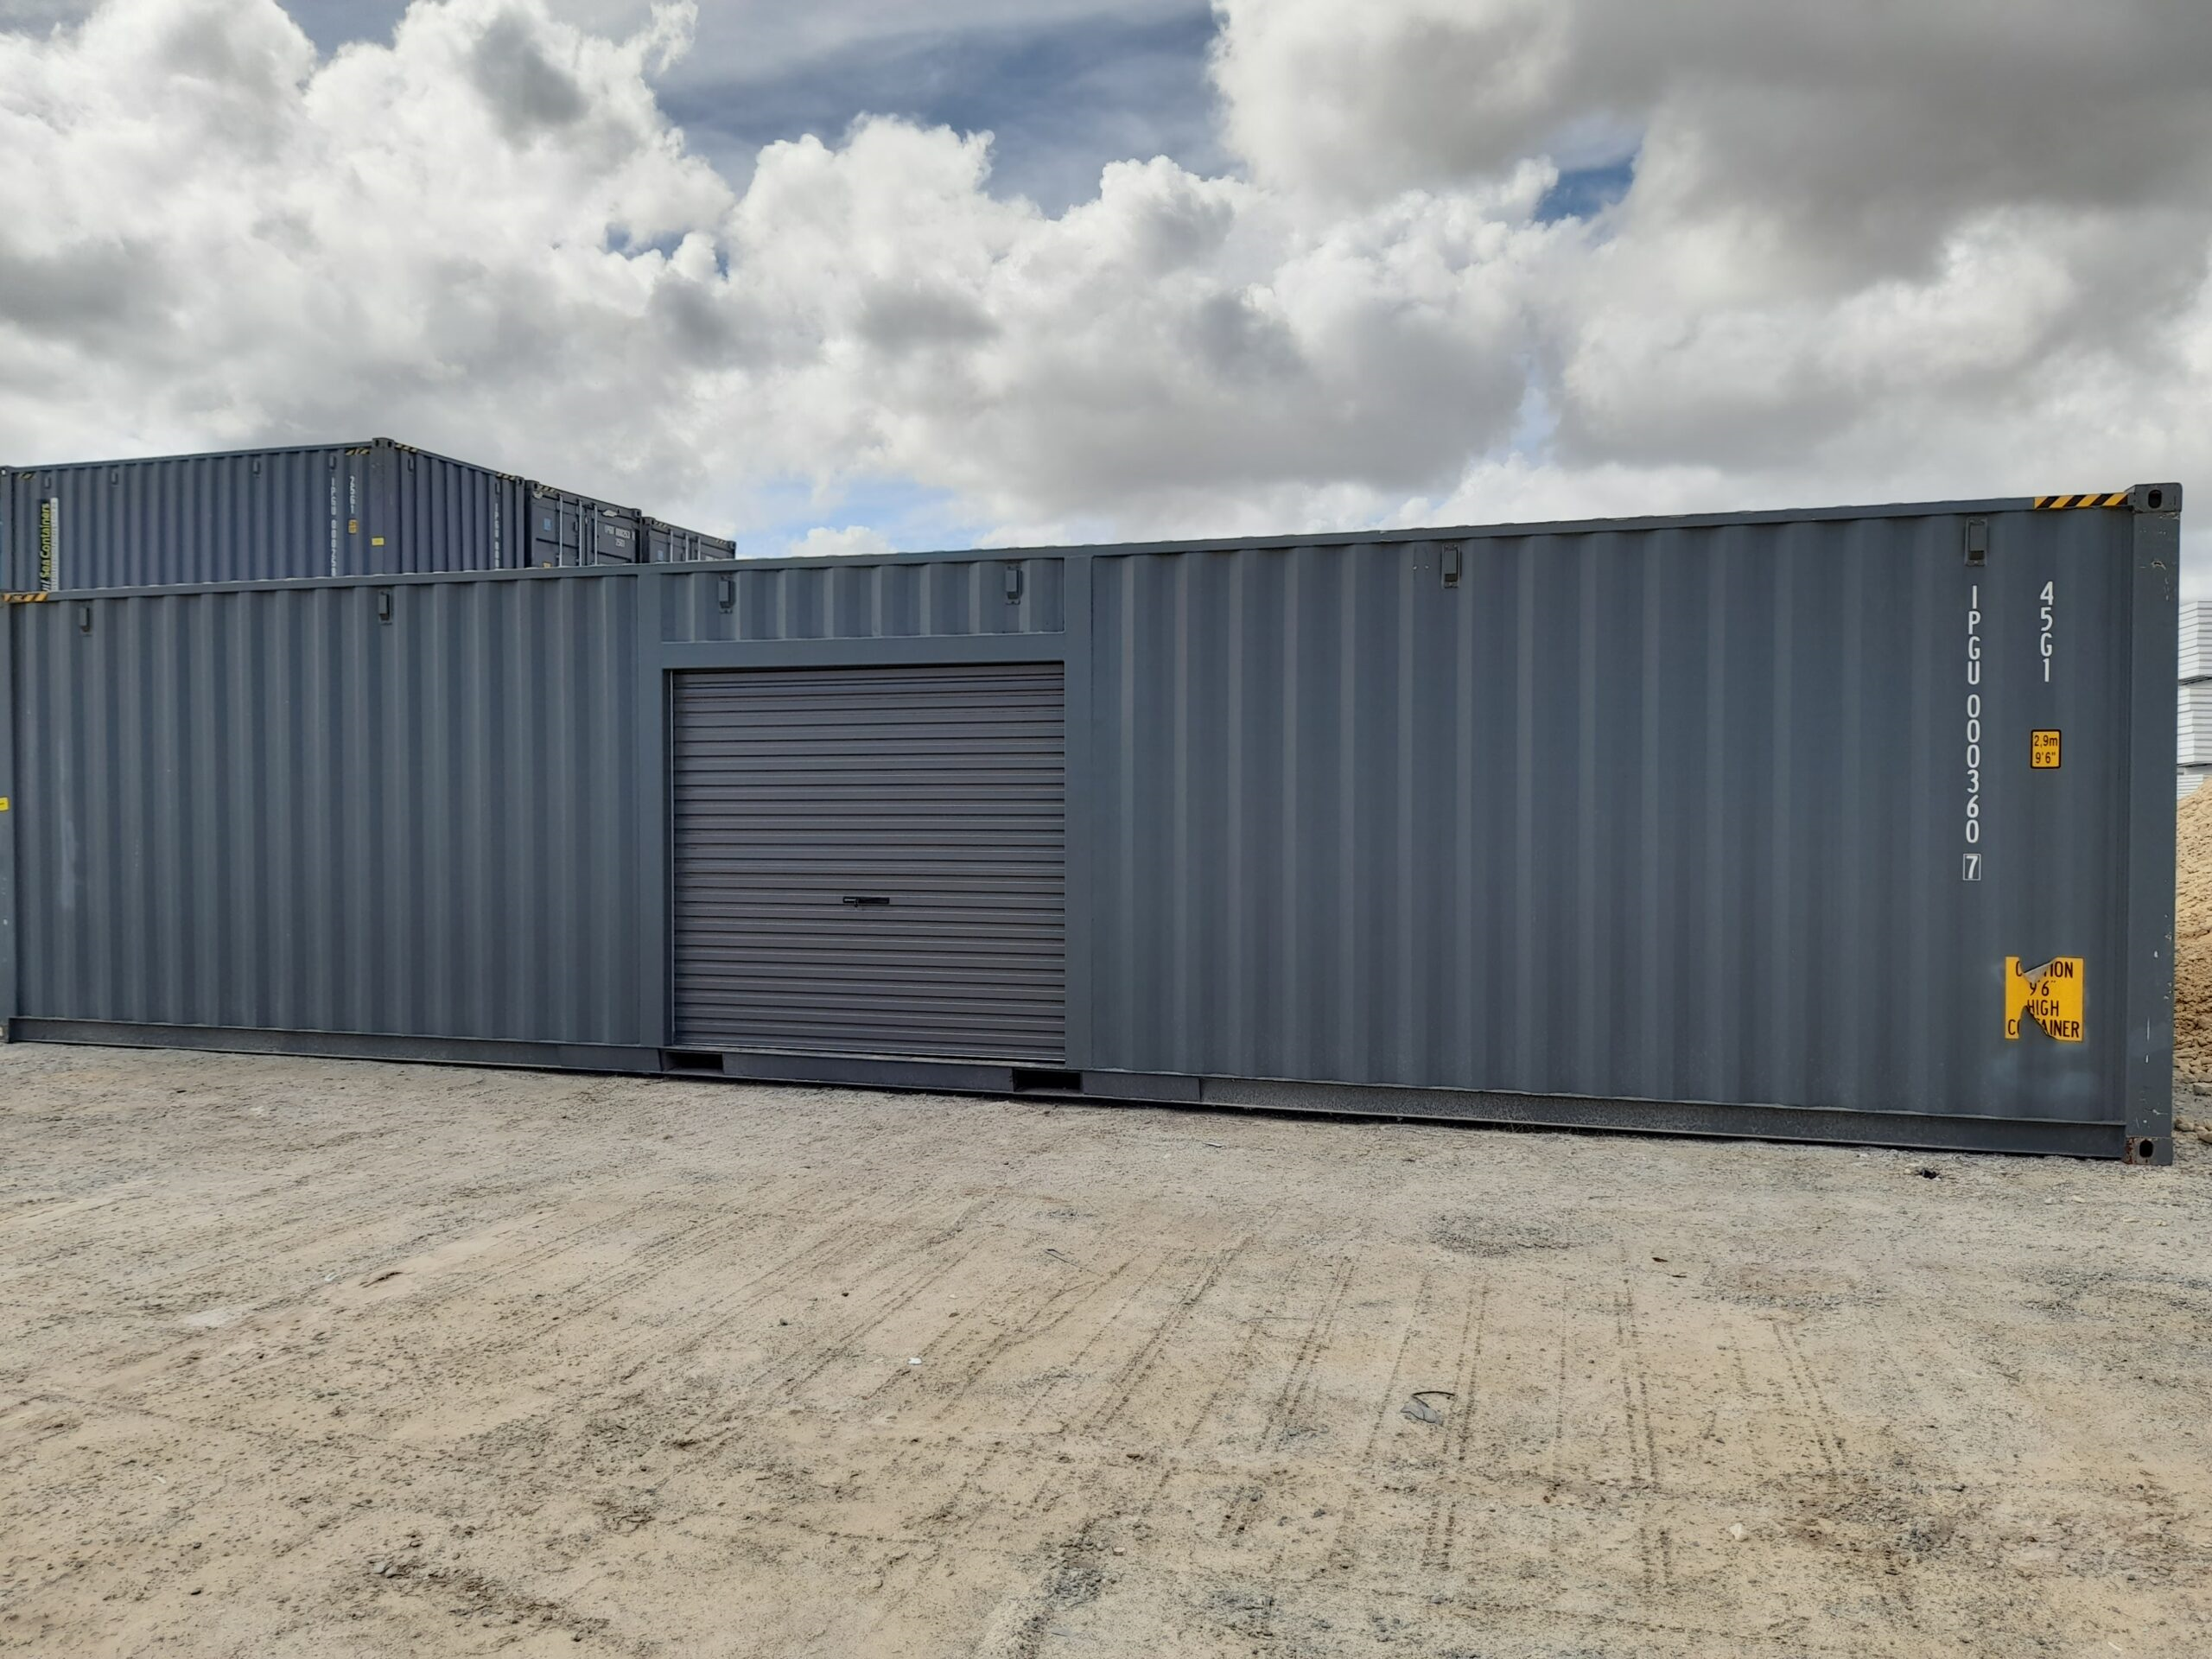 Large gray shipping container modified with a garage door, located on a gravel surface under a cloudy sky.